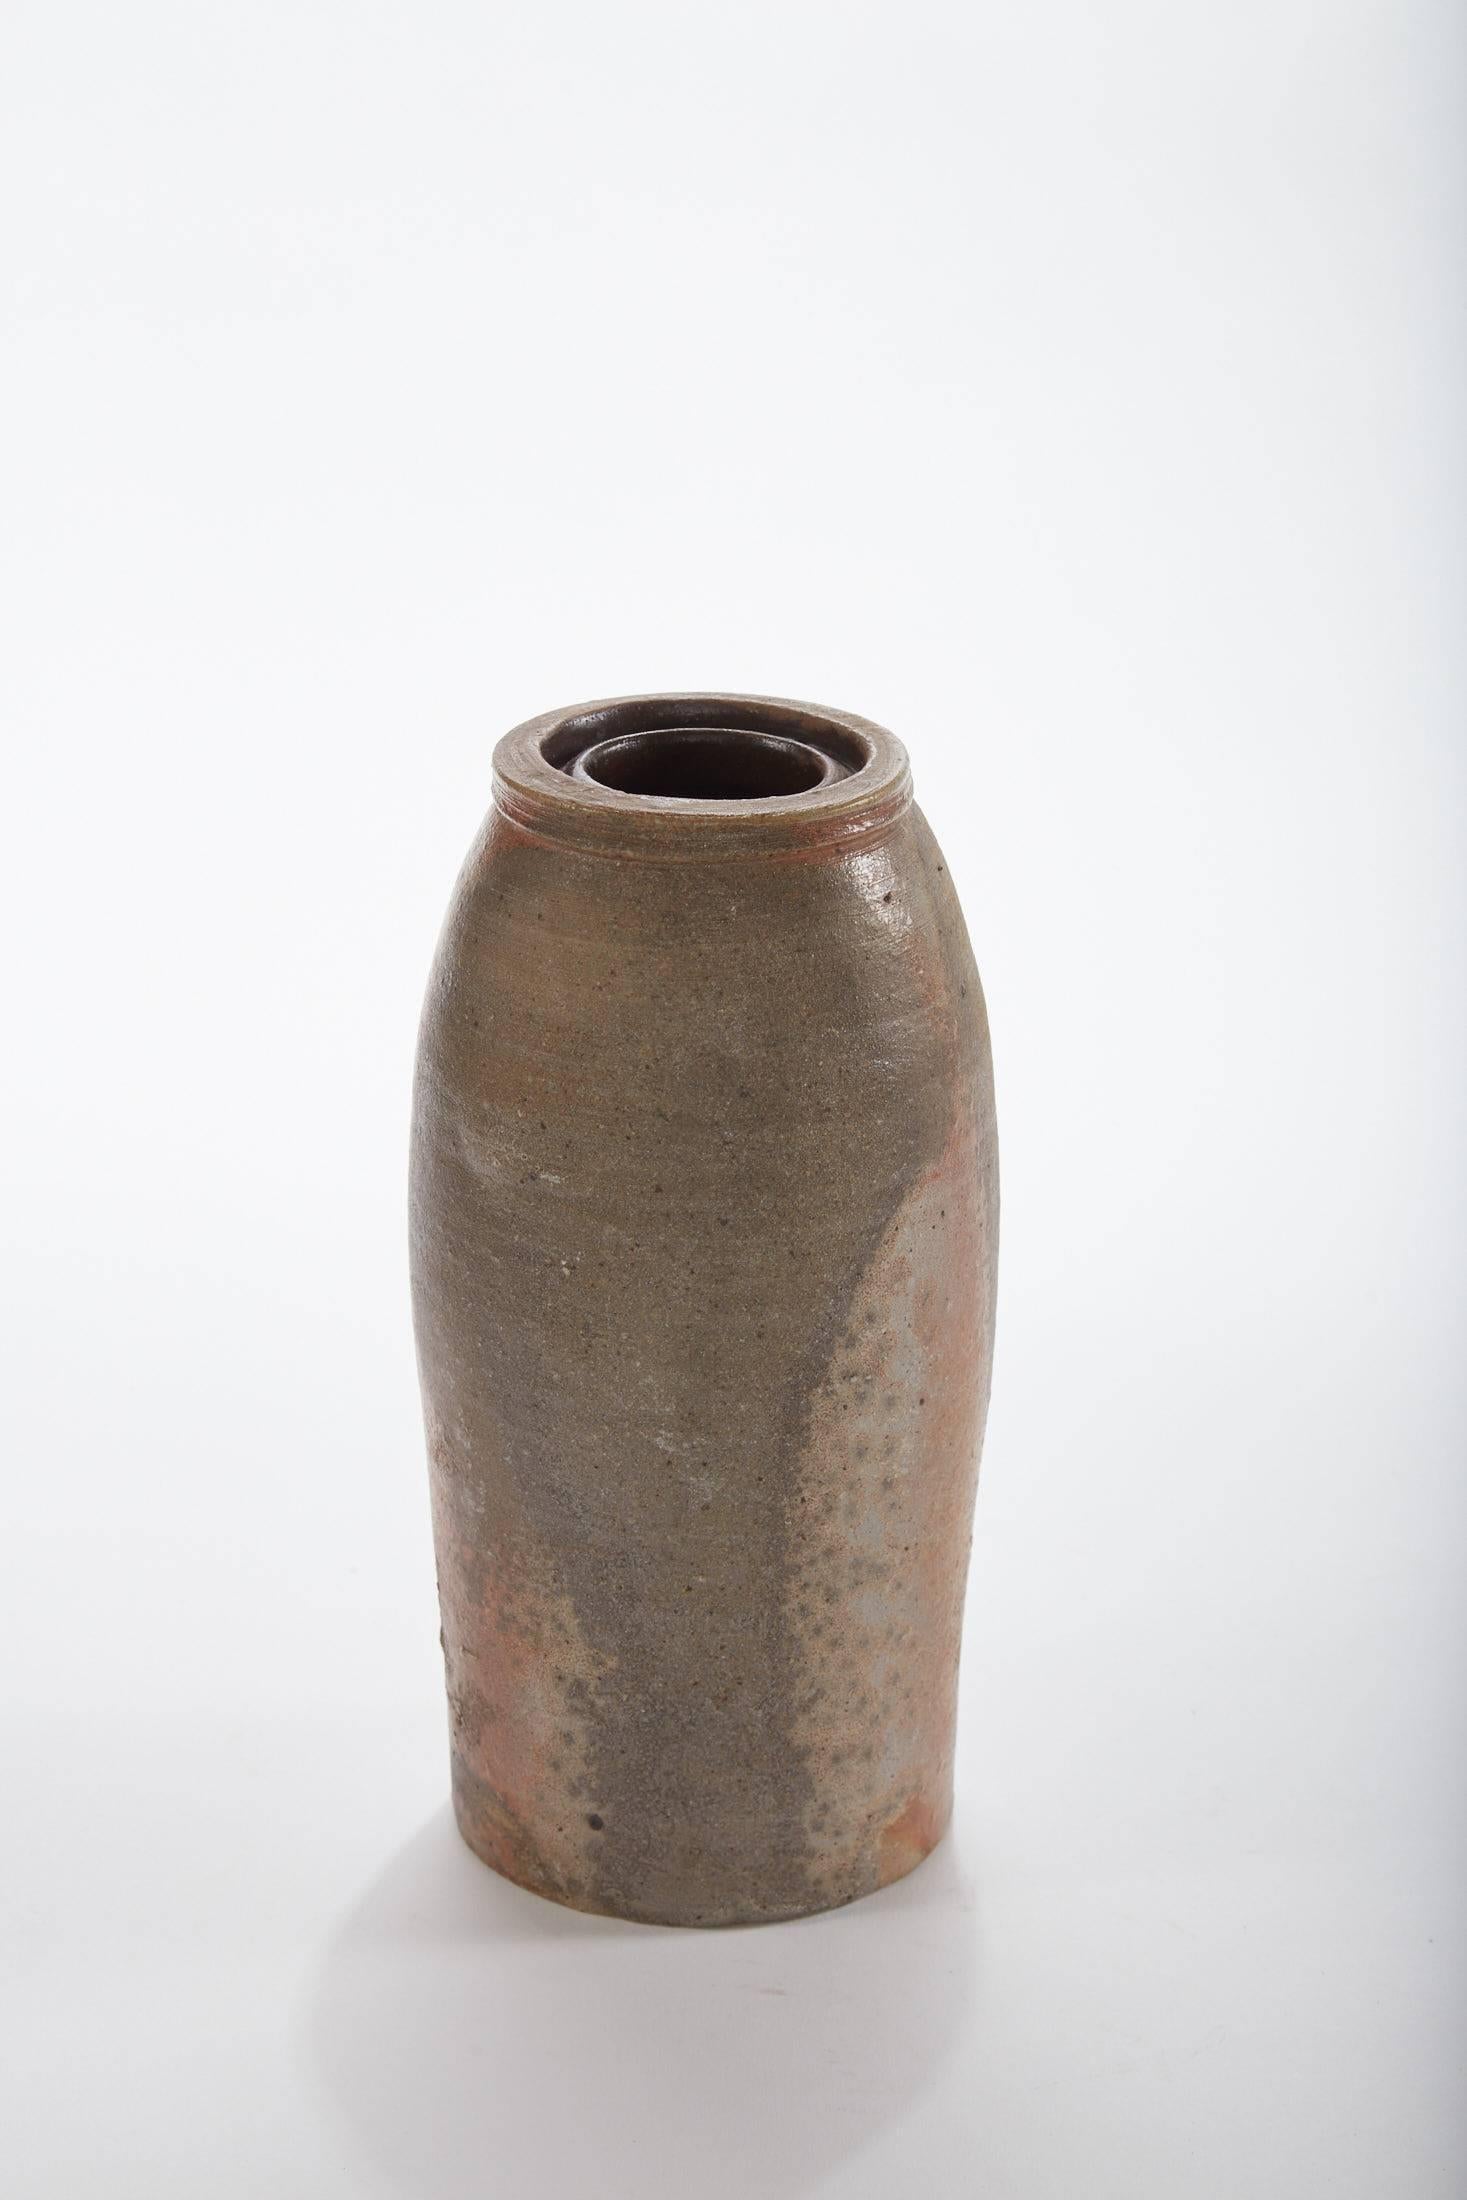 Late 19th century American salt glaze crock
Was used for storing.